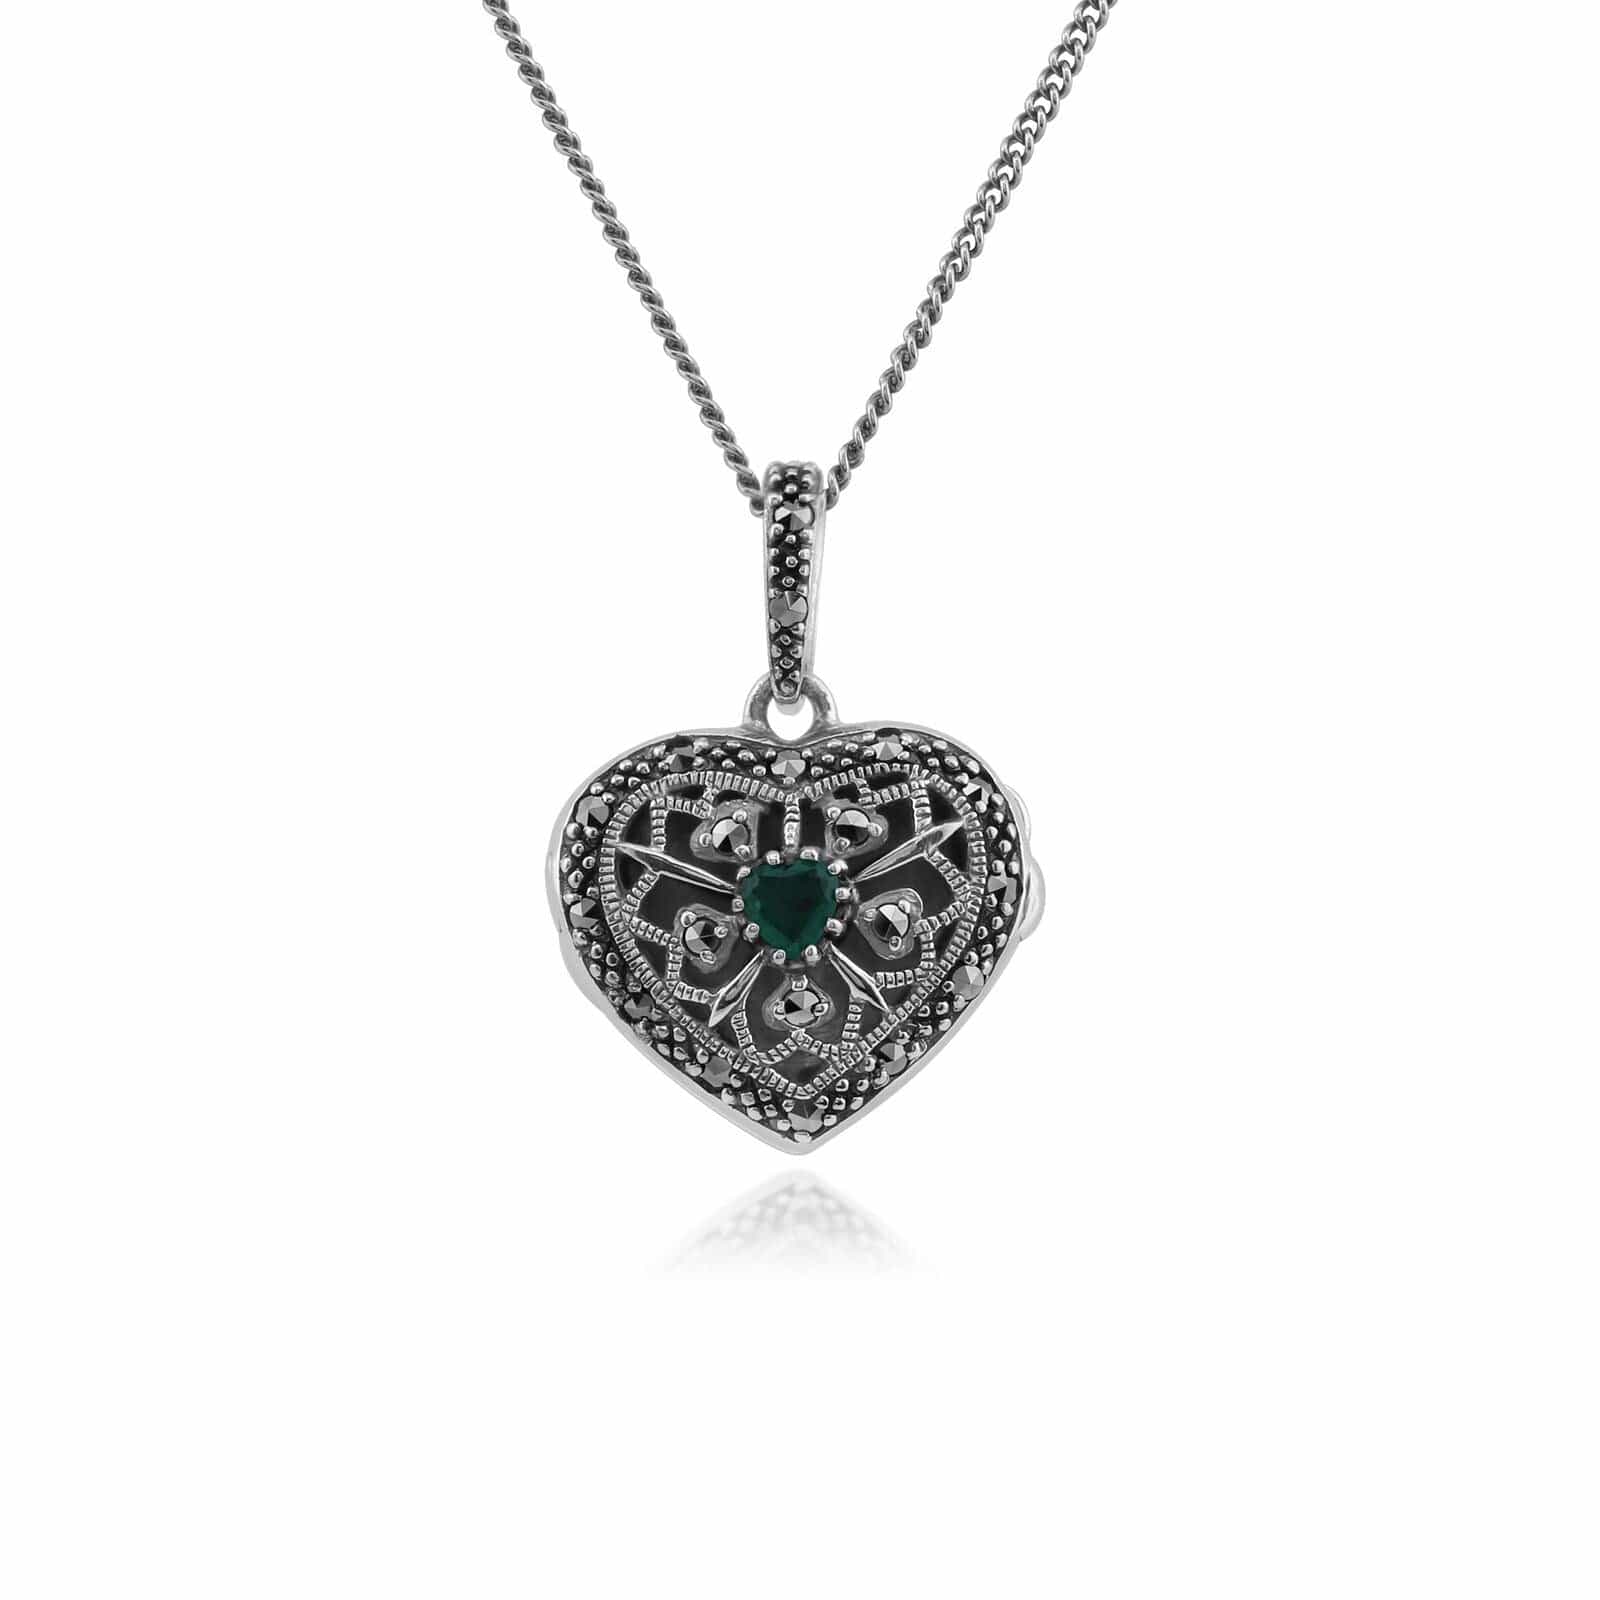 214N461910925 Art Nouveau Style Round Emerald & Marcasite Heart Necklace in 925 Sterling Silver 1